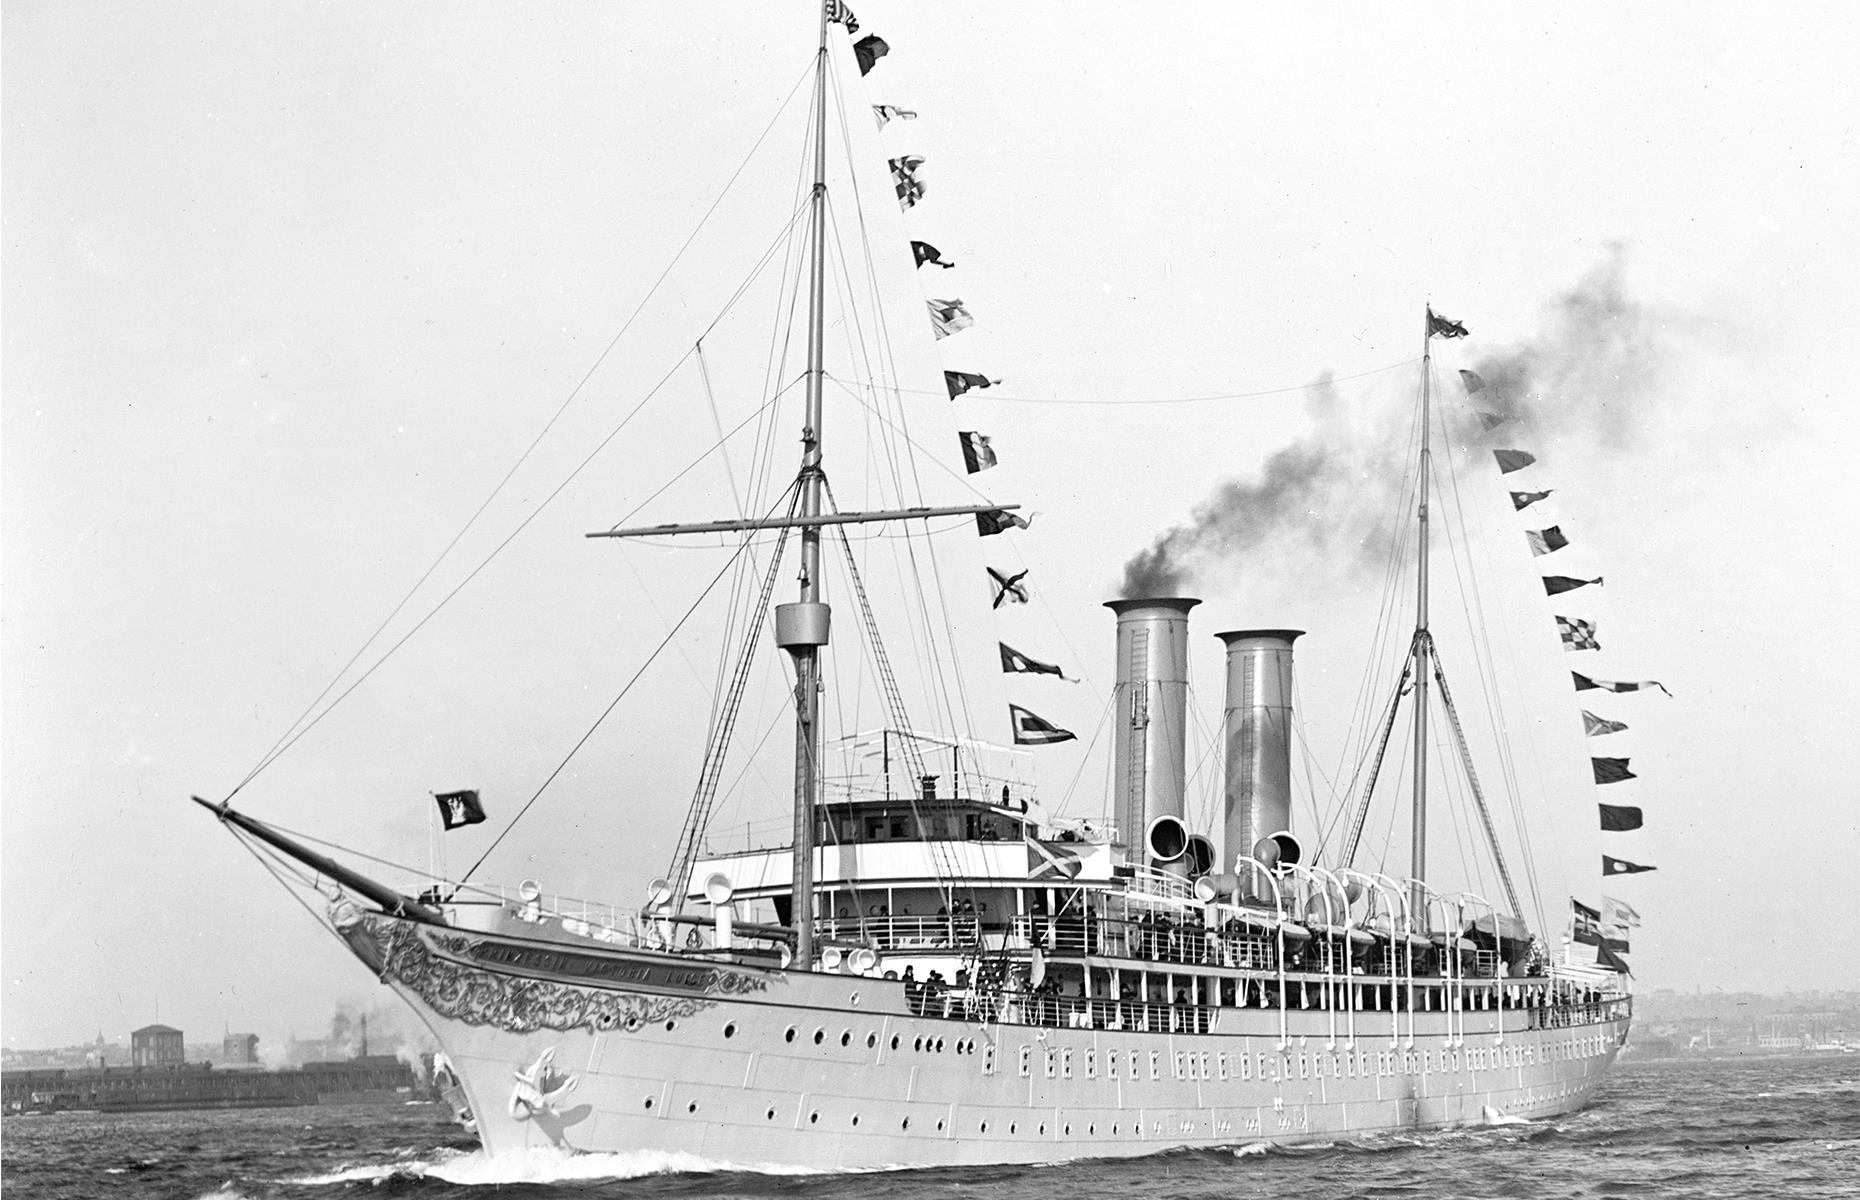 By the 1900s, passenger cruise services were nothing new. But the Prinzessin Victoria Luise (pictured) – a glamorous ship pioneered by the Hamburg America Line – is generally touted as the first purpose-built cruise ship. Launched in the summer of 1900, she was a grand ship with an ornately decorated bow and lavish interiors complete with luxurious first-class cabins. She came out of service in 1906 when she ran aground.